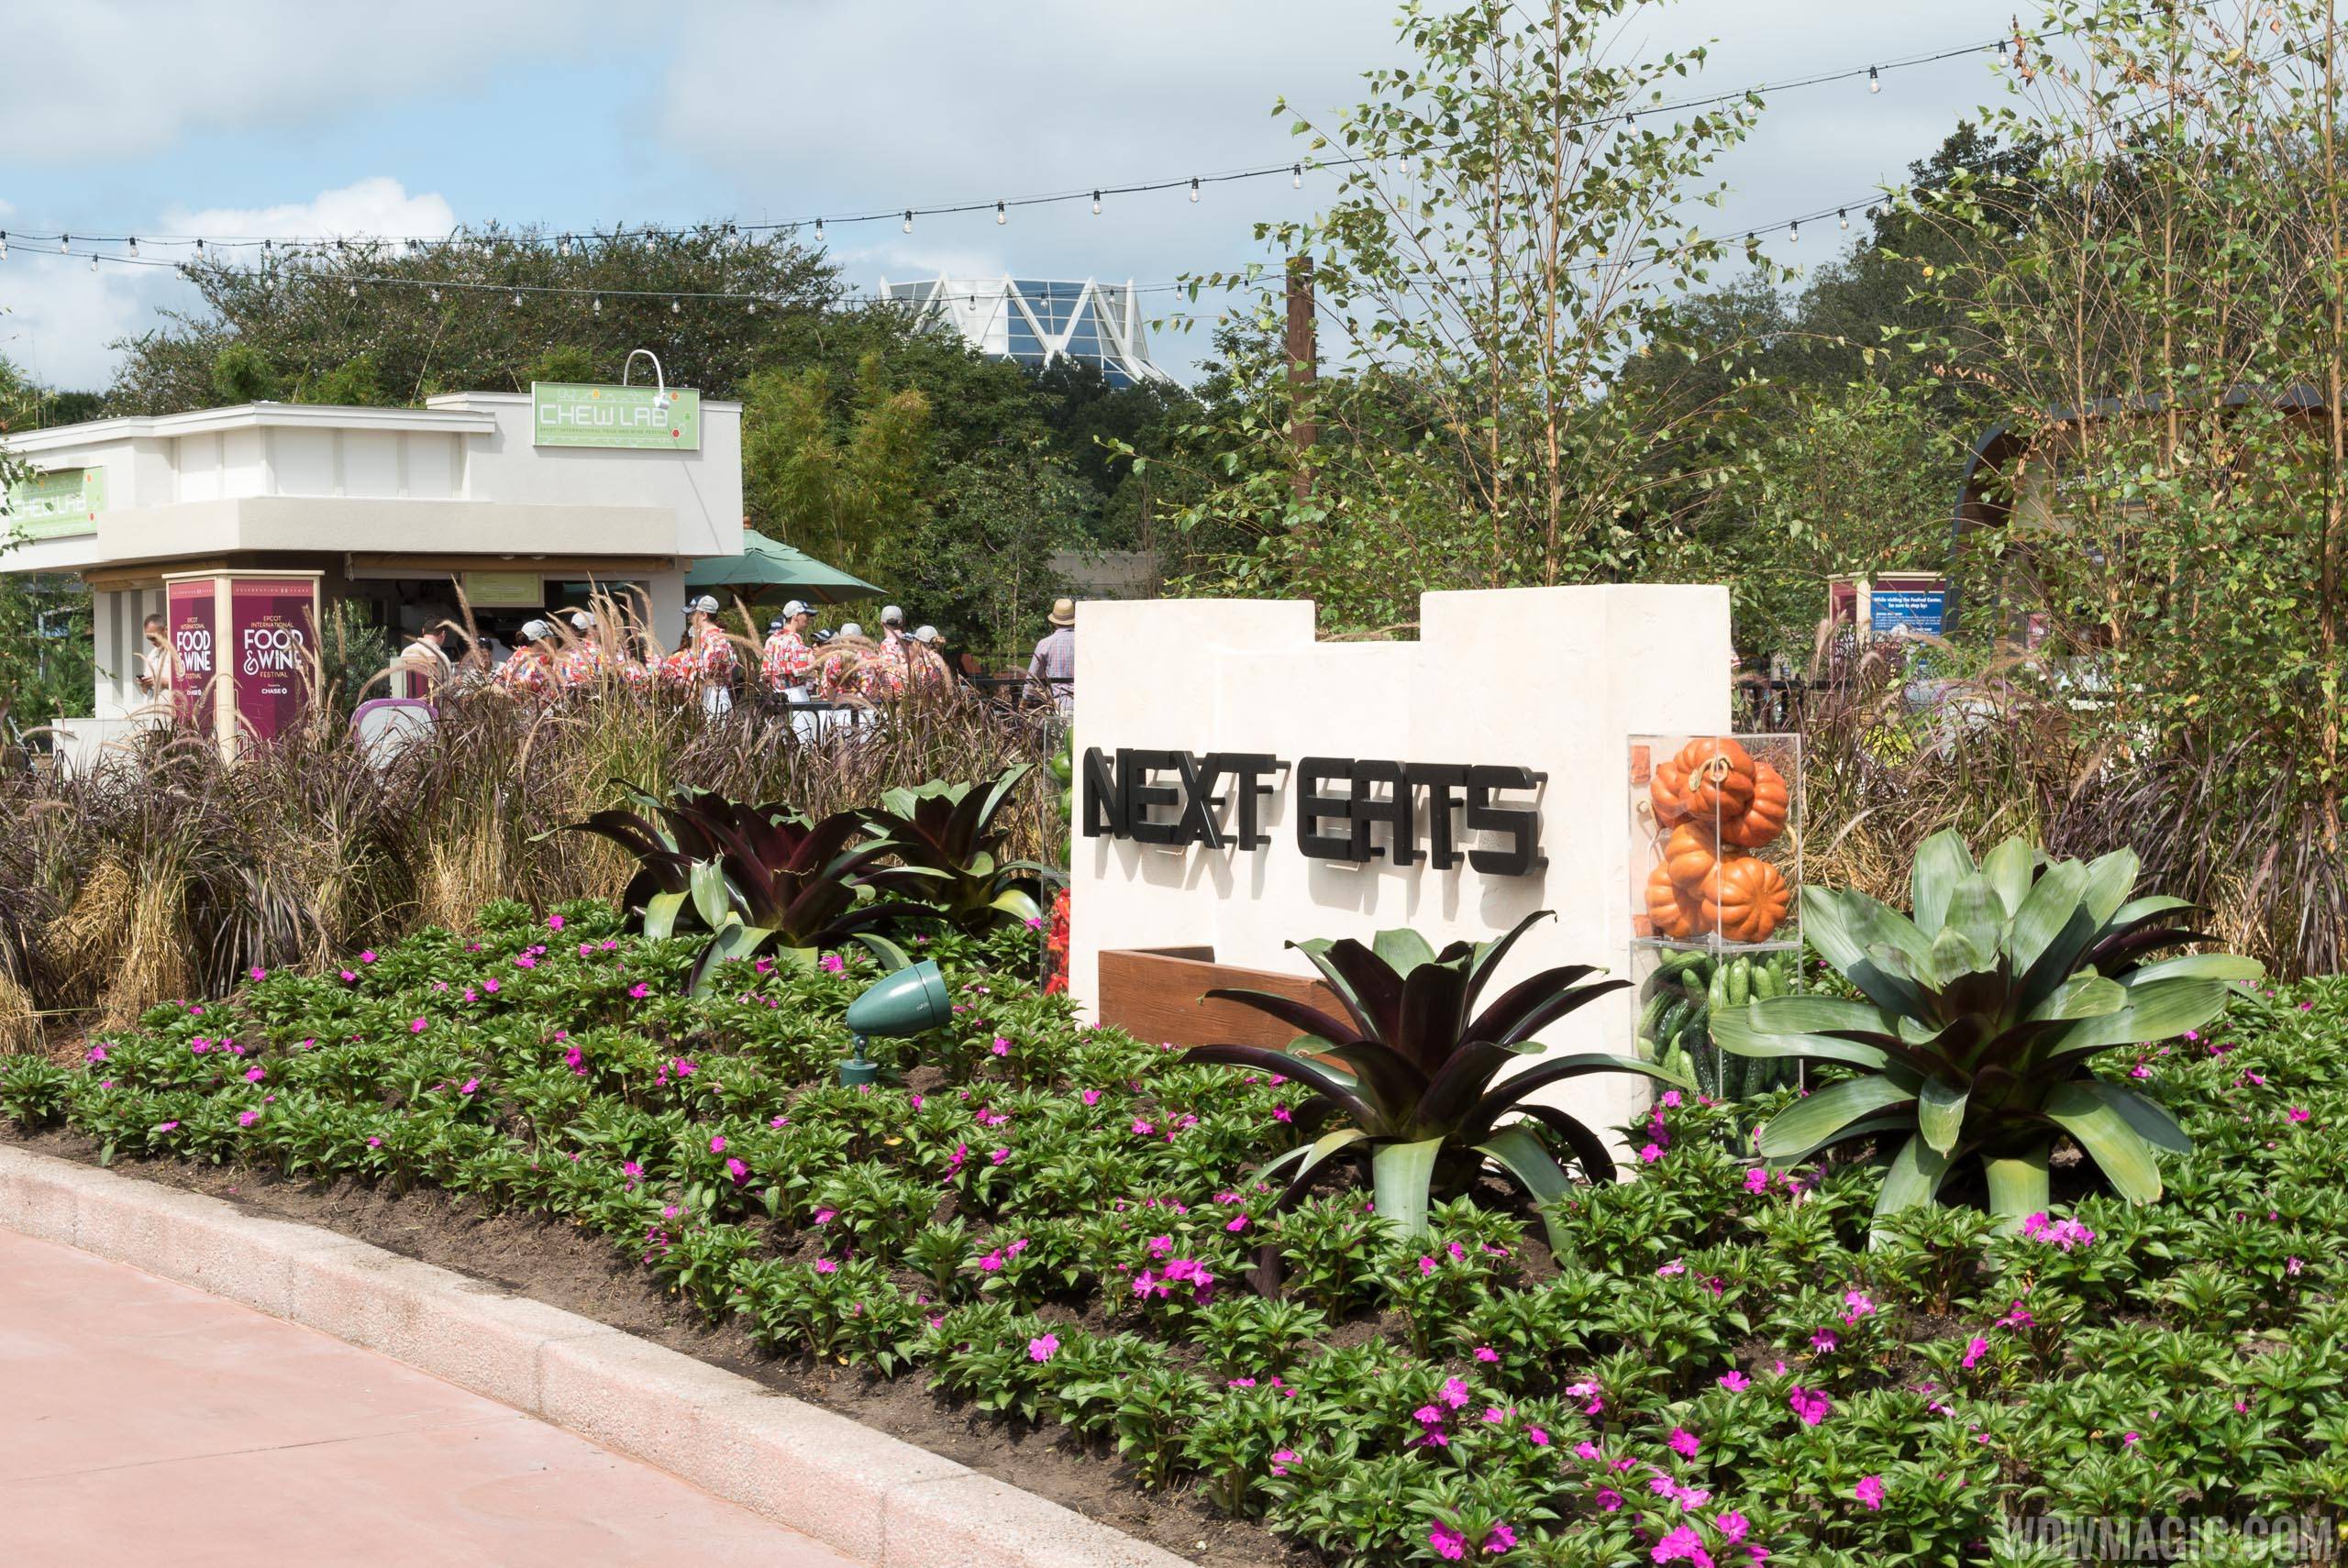 2015 Epcot Food and Wine Festival - Next Eats